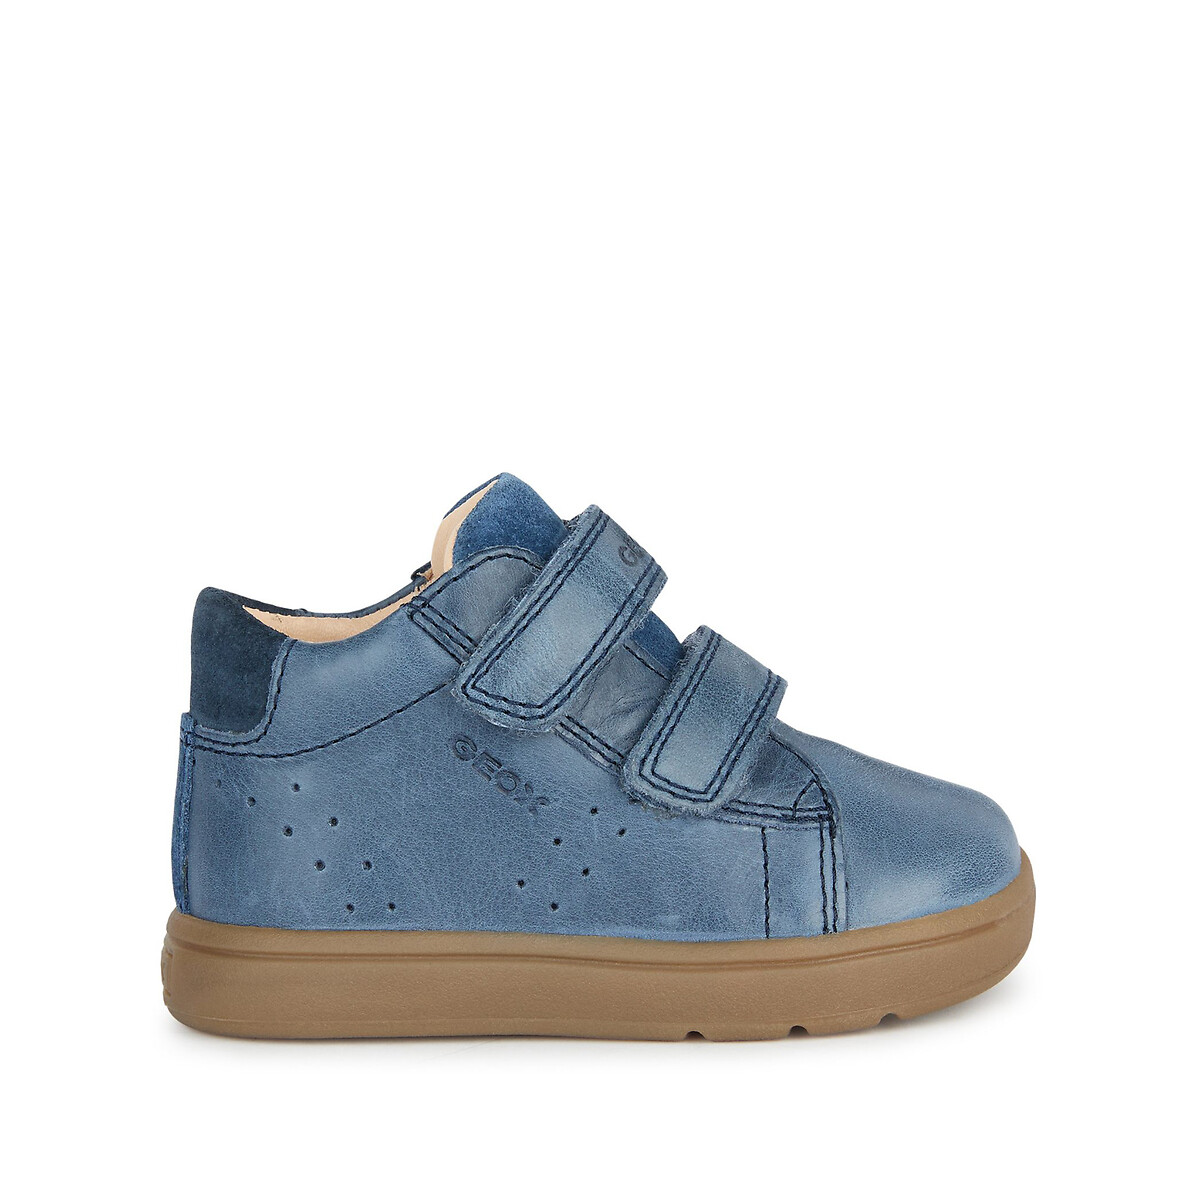 Image of Kids Biglia Trainers in Leather/Suede with Touch 'n' Close Fastening